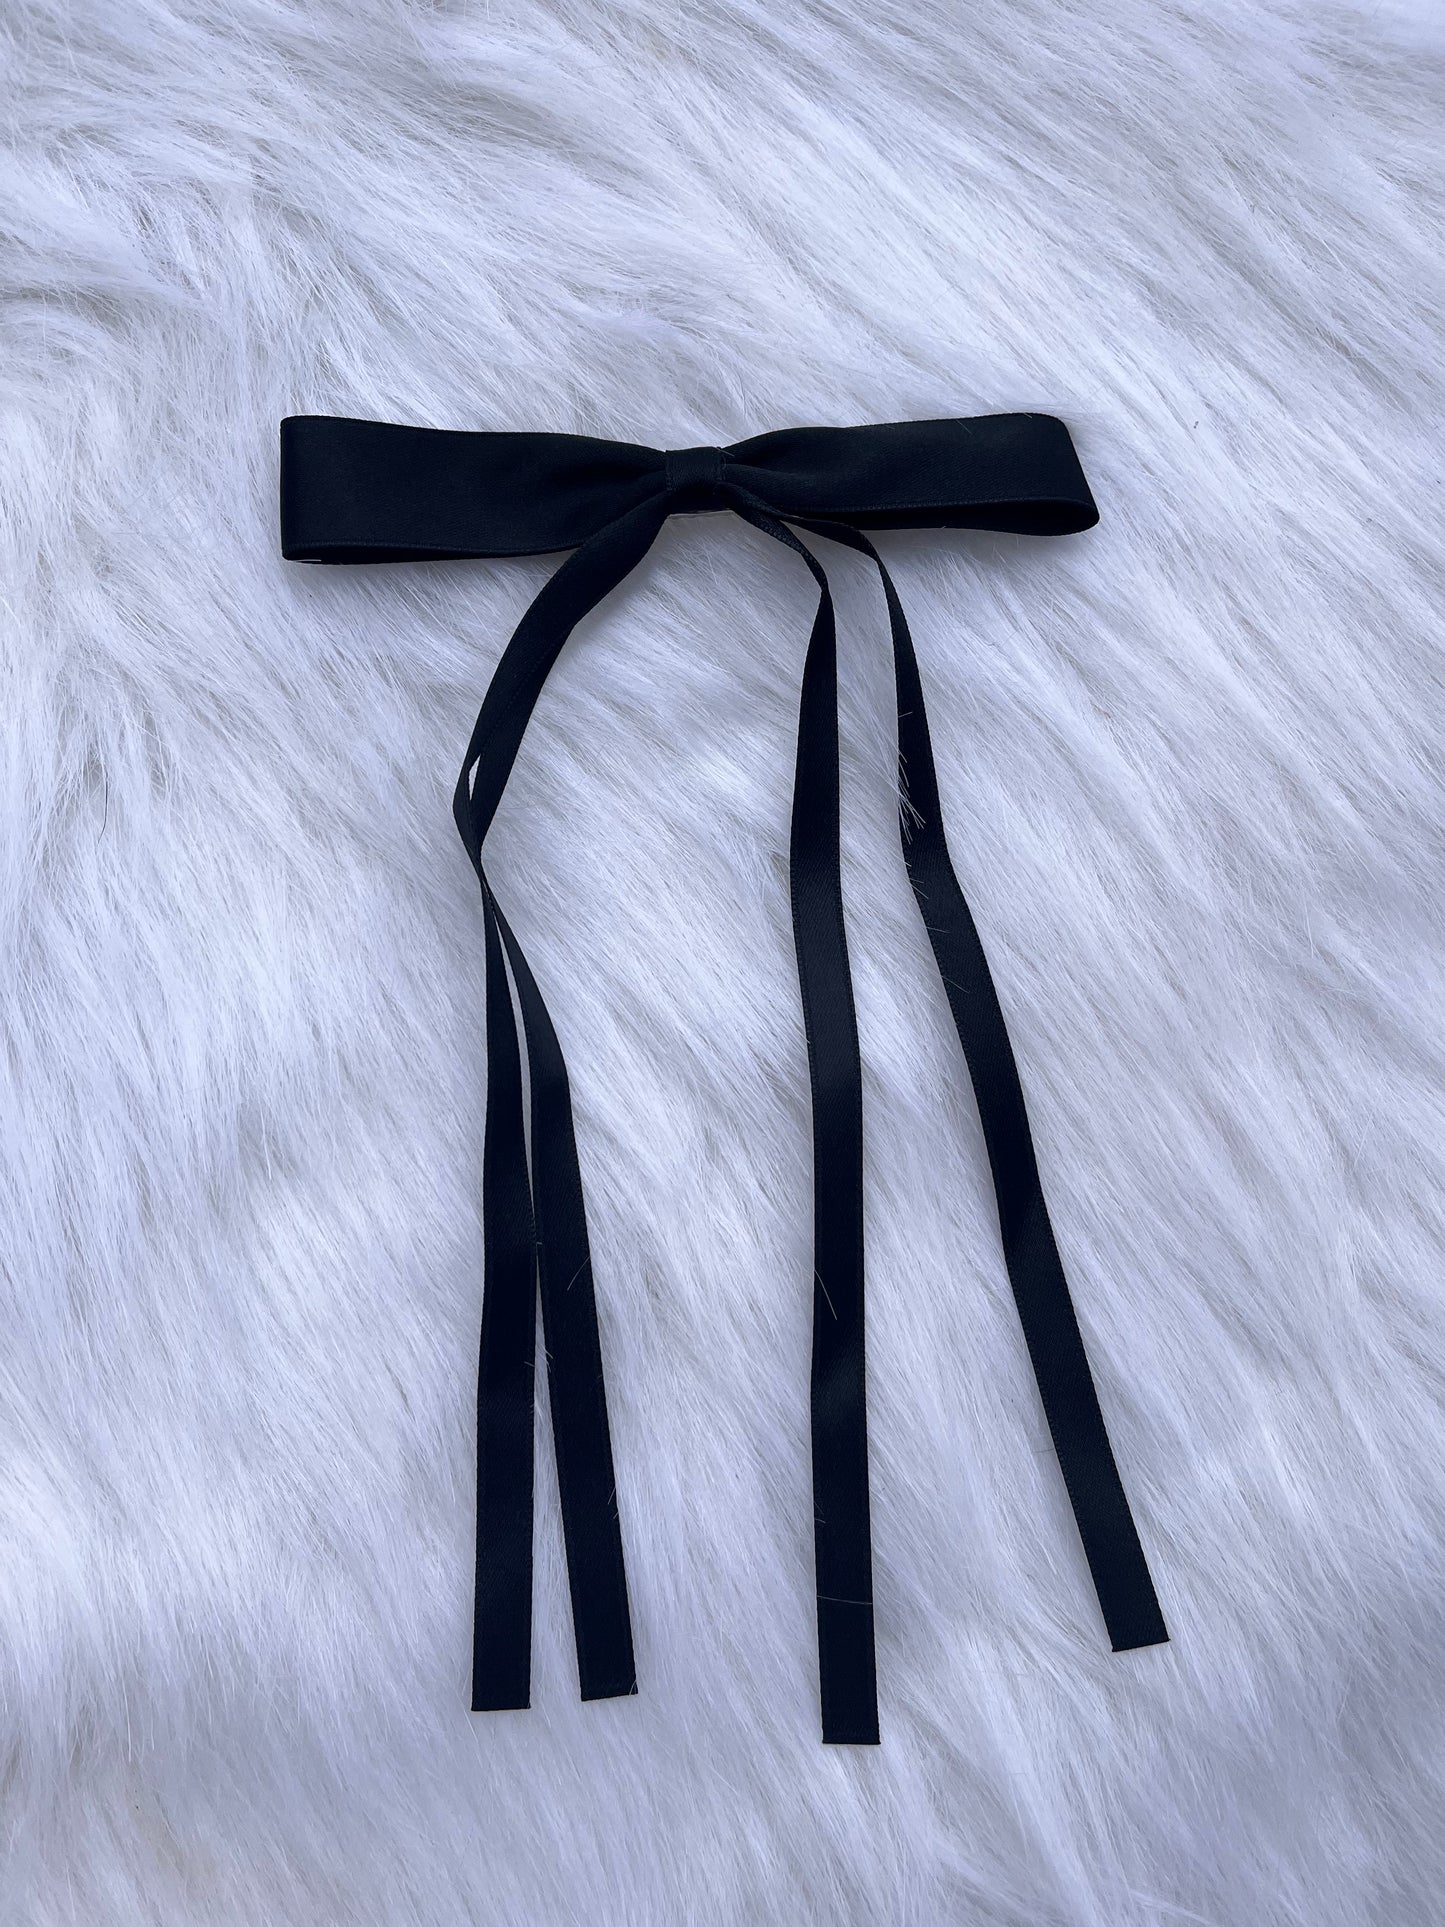 Coquette Bow (many colors available)